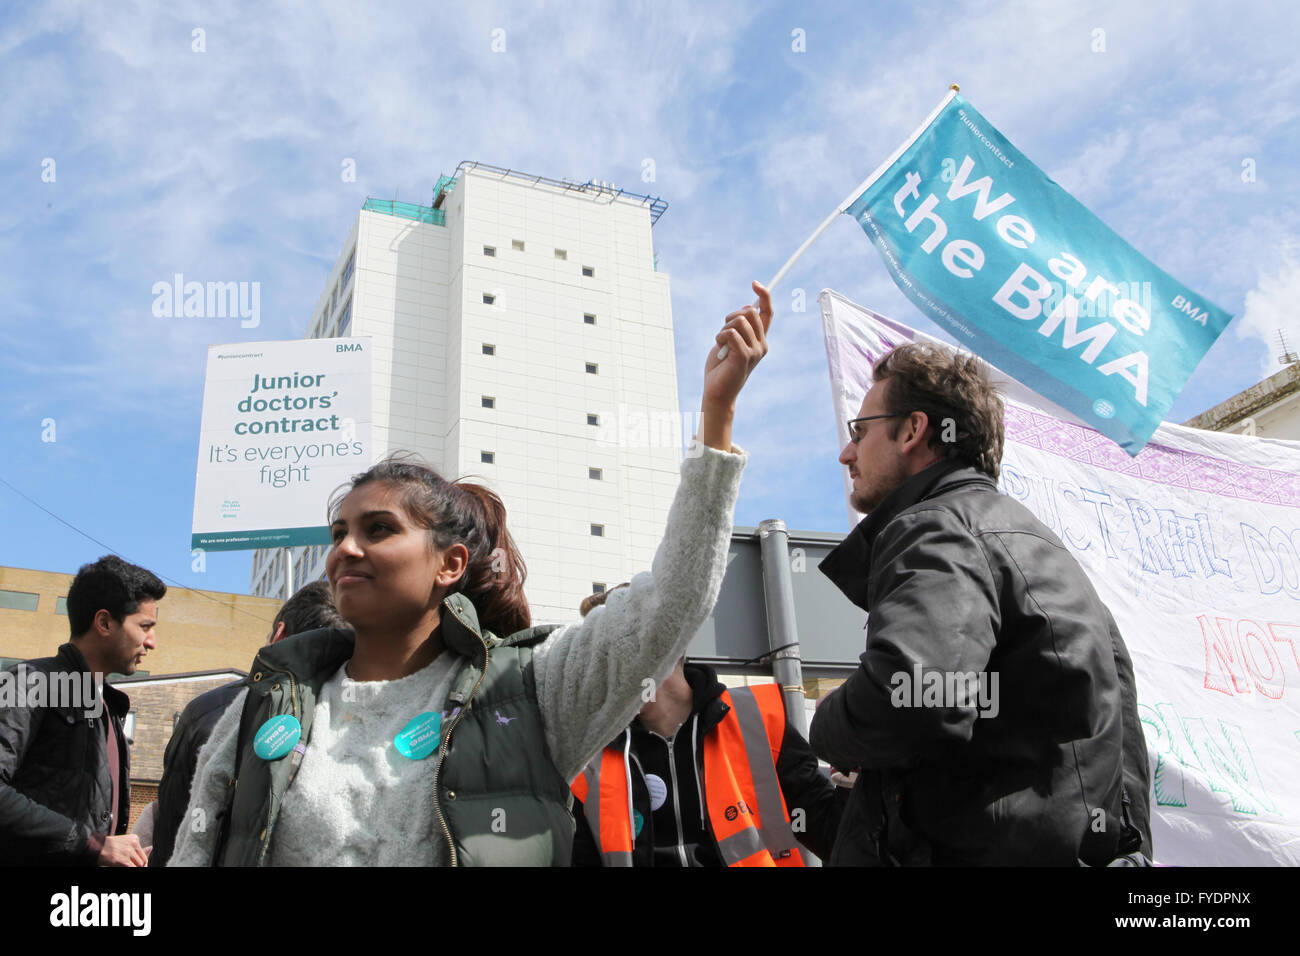 Brighton, UK. 26th April, 2016. Maddie Shrotri, a 24-year-old junior doctor, protests outside the Royal Sussex County Hospital in Brighton as thousands of junior doctors across England stage a historic all-out strike by walking out of both routine and emergency care in protest at the imposition of a new work contract. Credit:  Randi Sokoloff/Alamy Live News Stock Photo